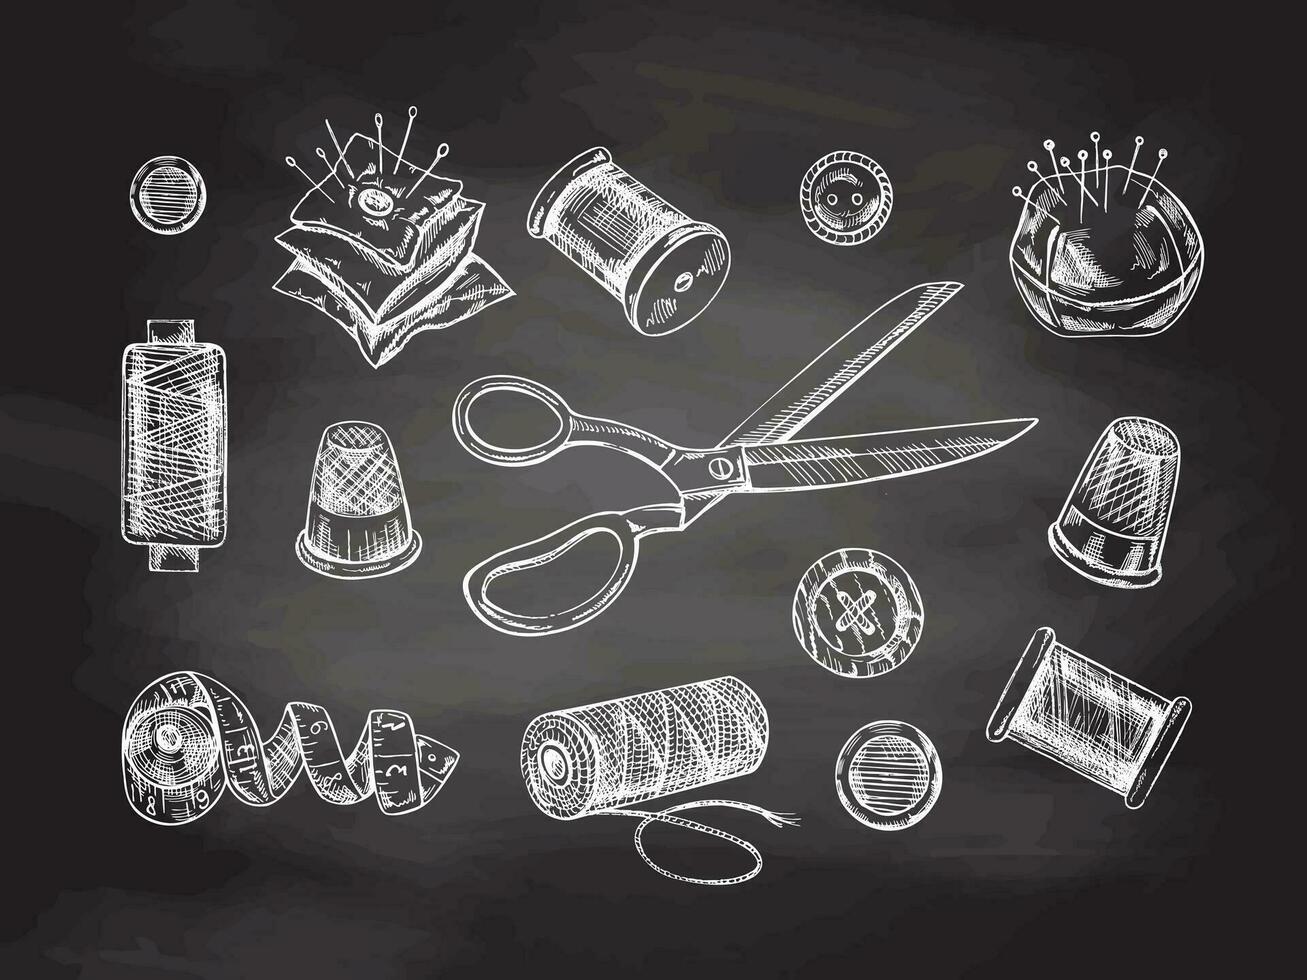 Vintage set of hand drawn sewing icons on chalkboard background. Vector illustrations in sketch style. Handmade, sewing equipment concept in vintage doodle style. Engraving style.